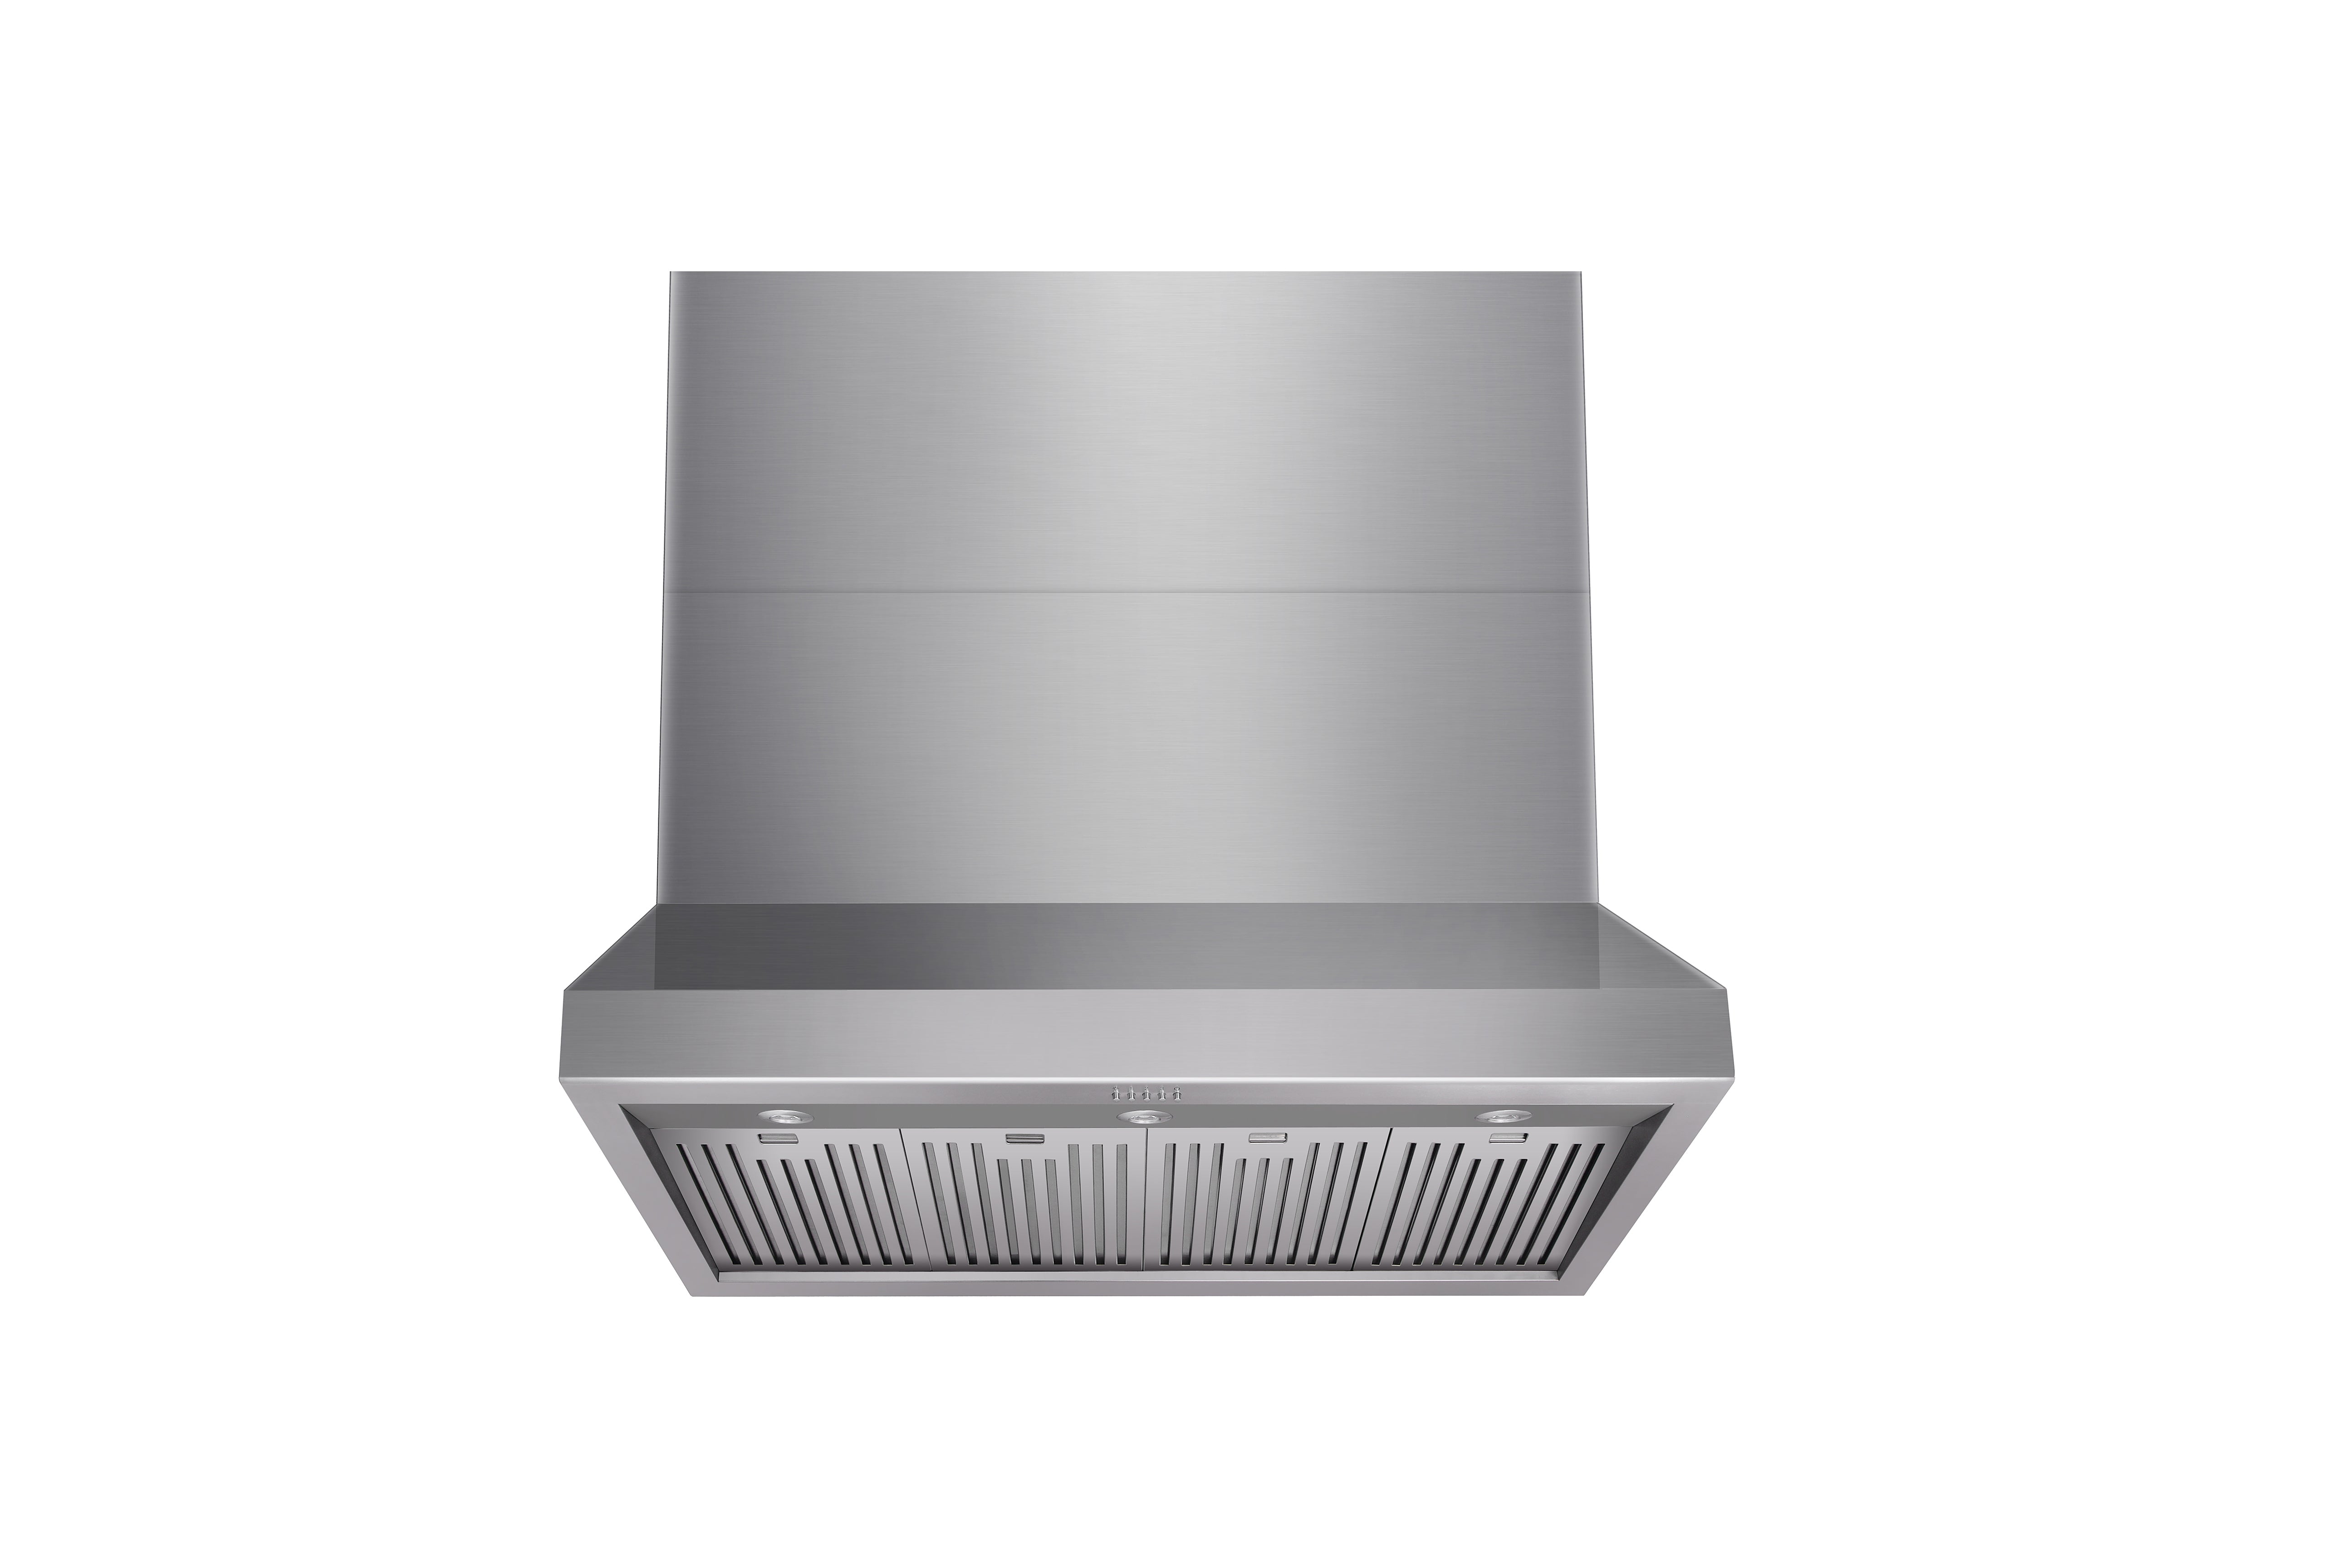 TRH4805-R (Renewed) Thor Kitchen 48 Inch Professional Range Hood, 16.5 Inches Tall in Stainless Steel